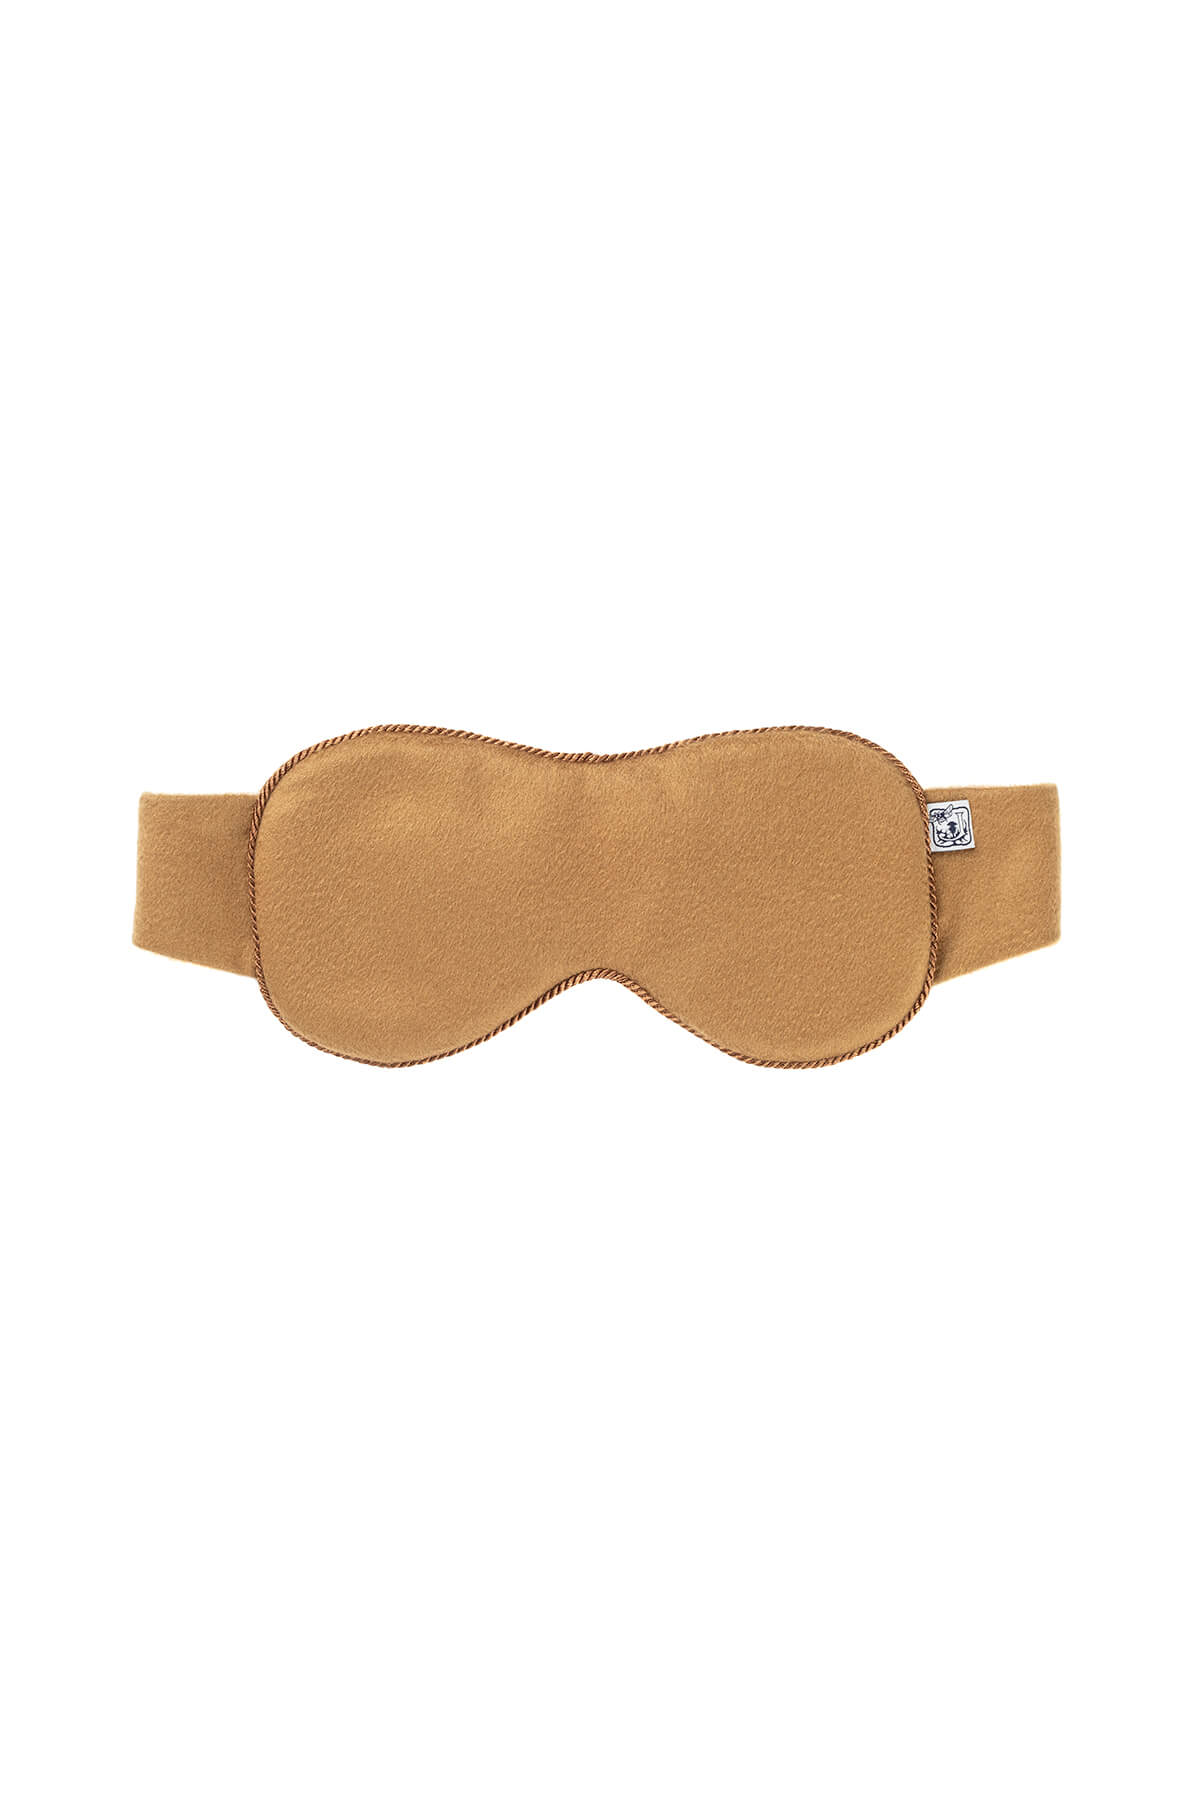 Johnstons of Elgin Cashmere Eye Mask with Silk Lining in Camel on a white background TA0003407310ONE